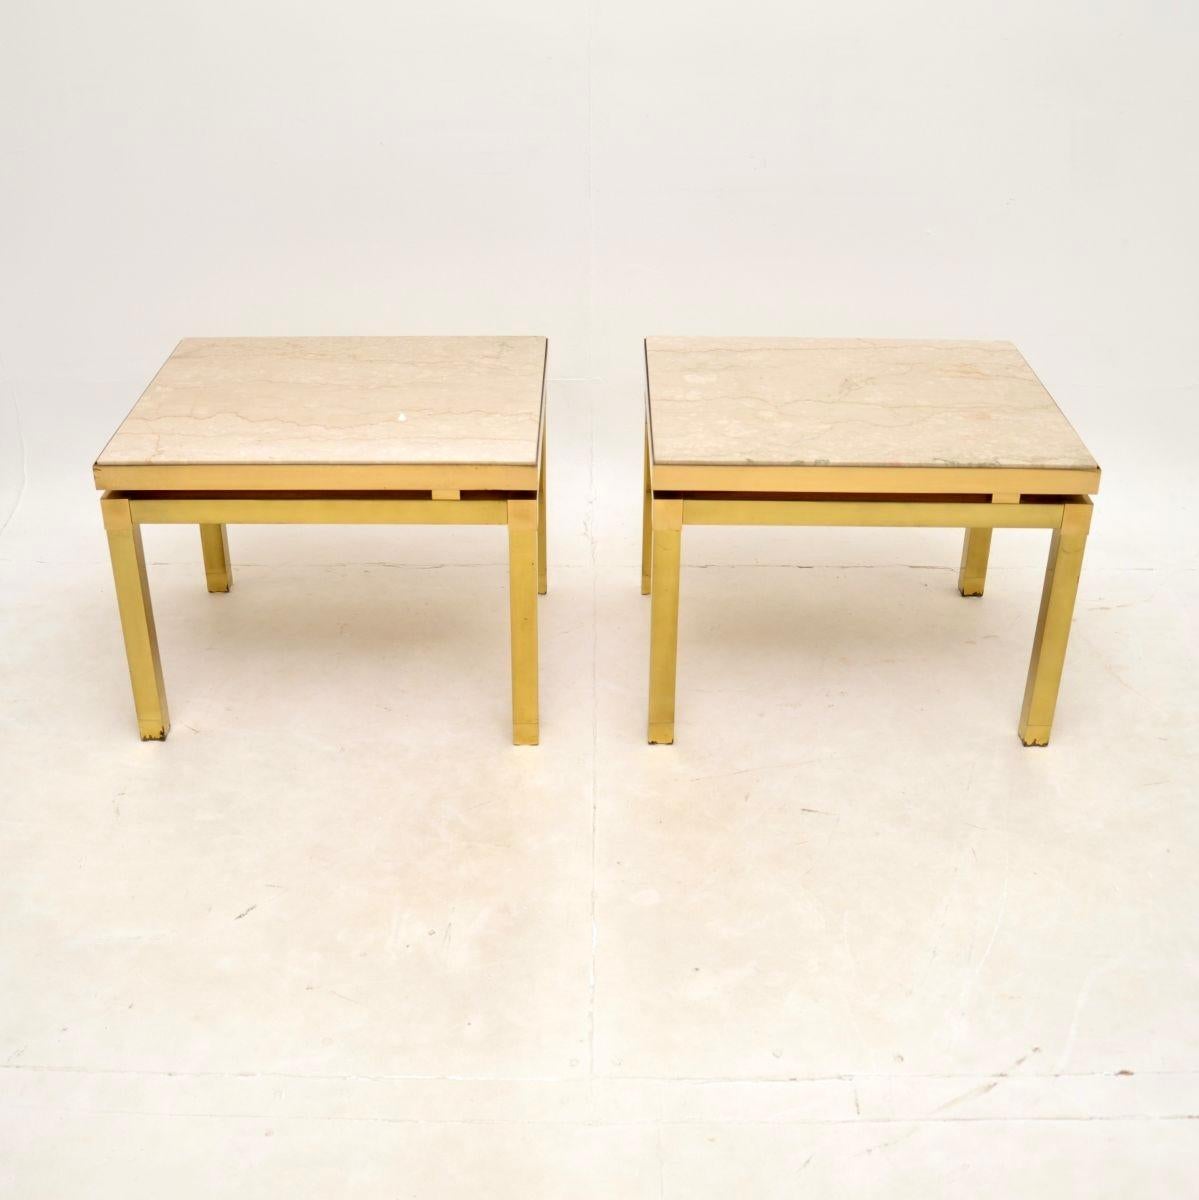 A stunning pair of vintage Italian brass and marble side tables, dating from the 1970’s.

They are of outstanding quality, the solid bras frames are heavy and very well made. They are beautifully styled and have inset cream marble tops that can be